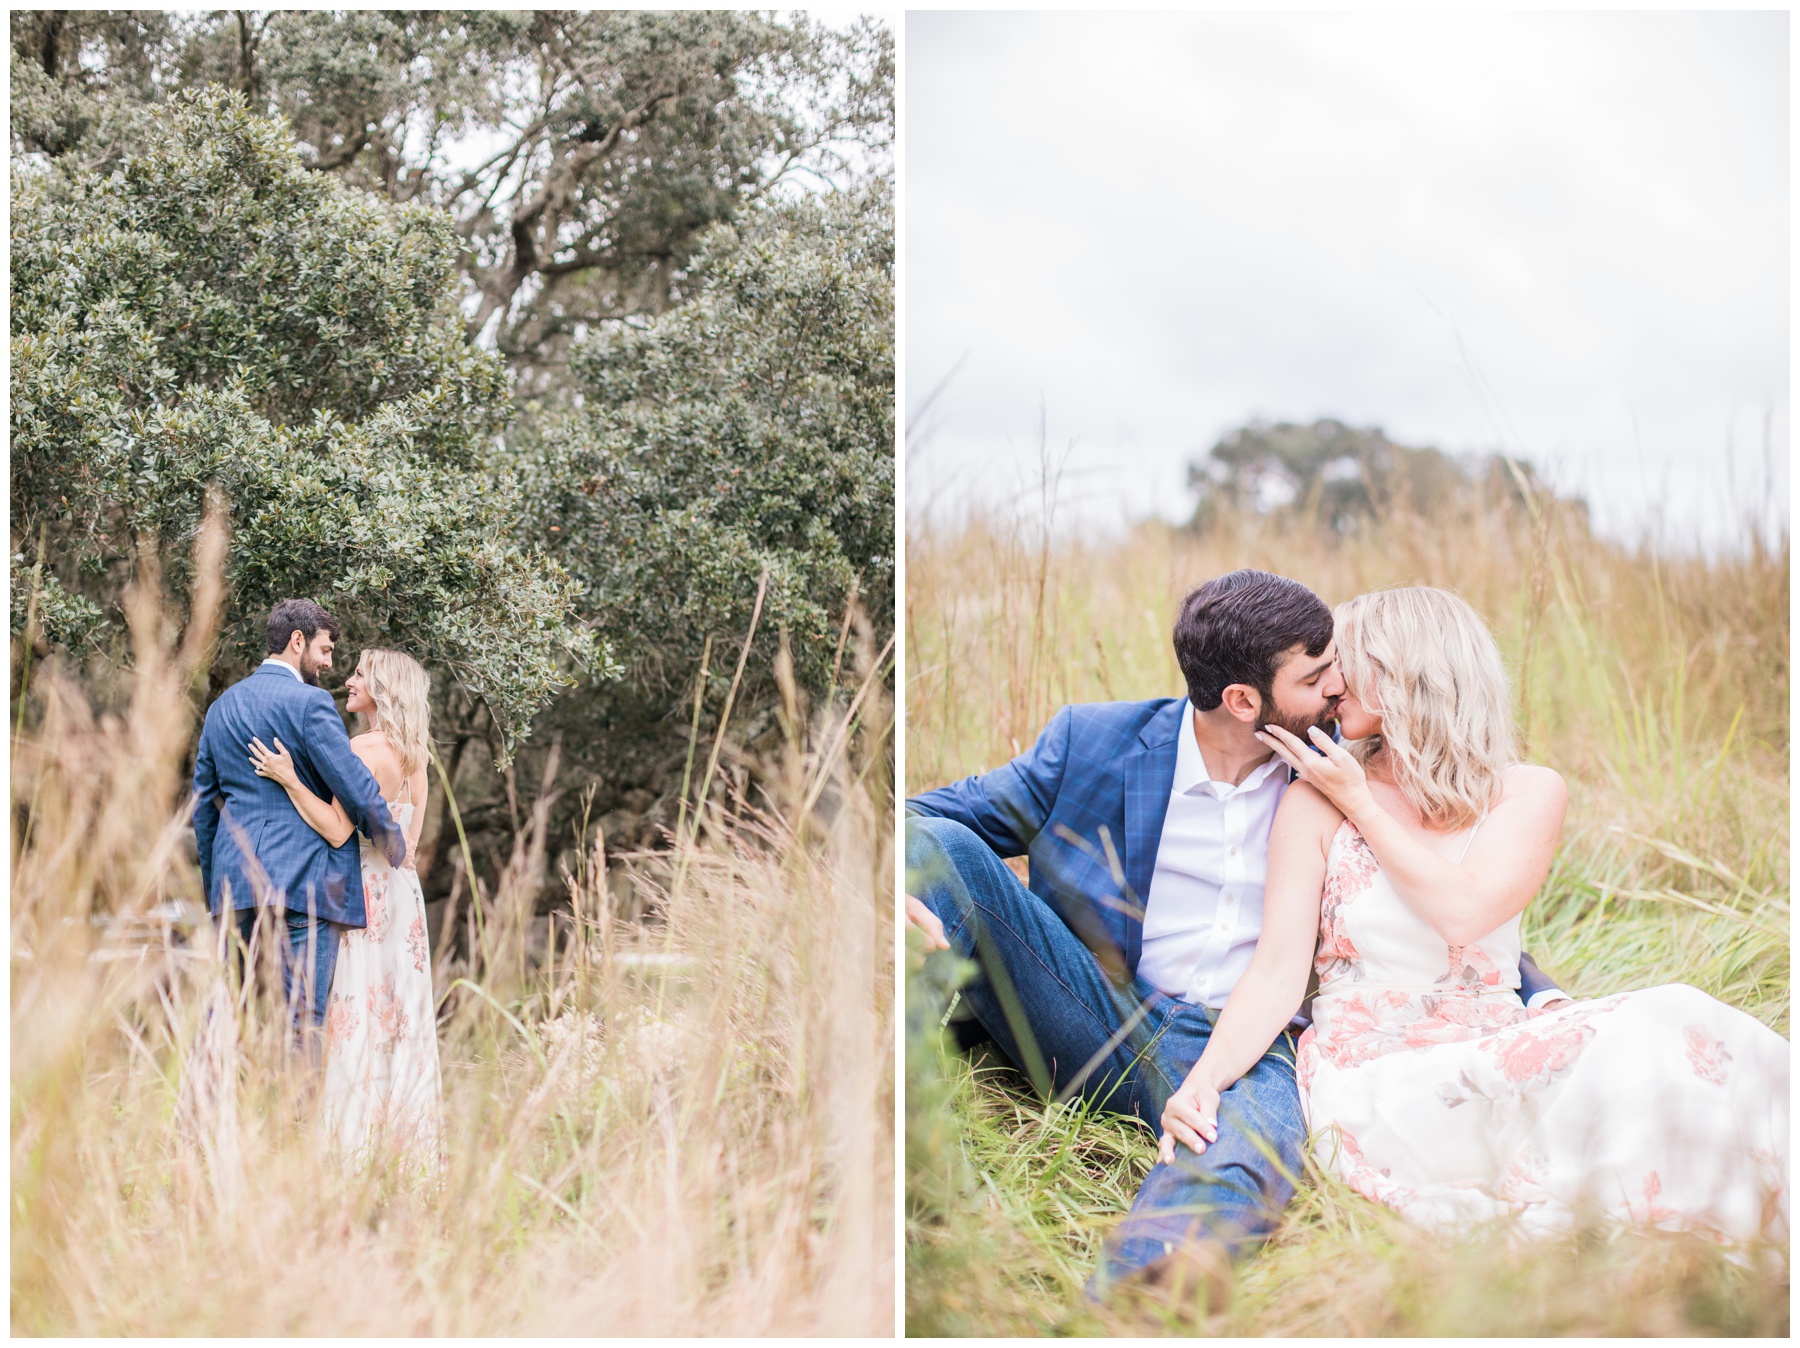 Outdoor engagement session locations in Houston